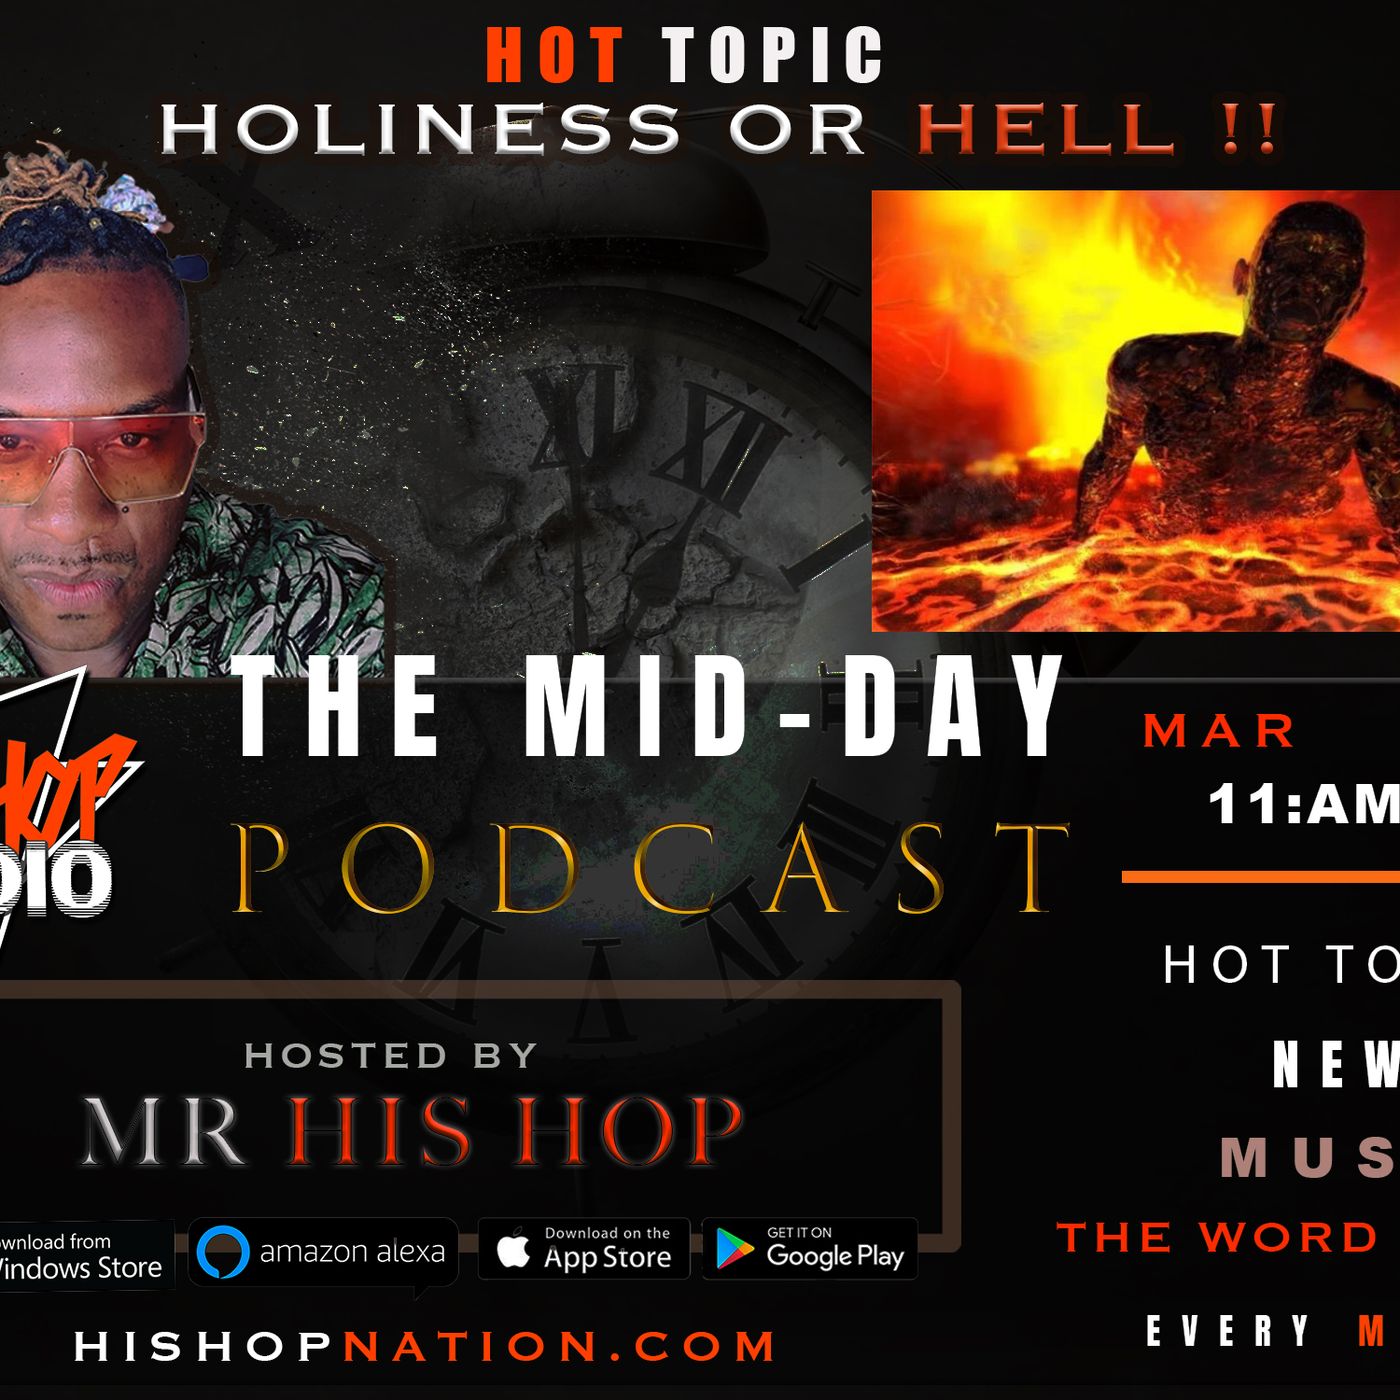 EPISODE 93 - HIS HOP RADIO - BE HOLY